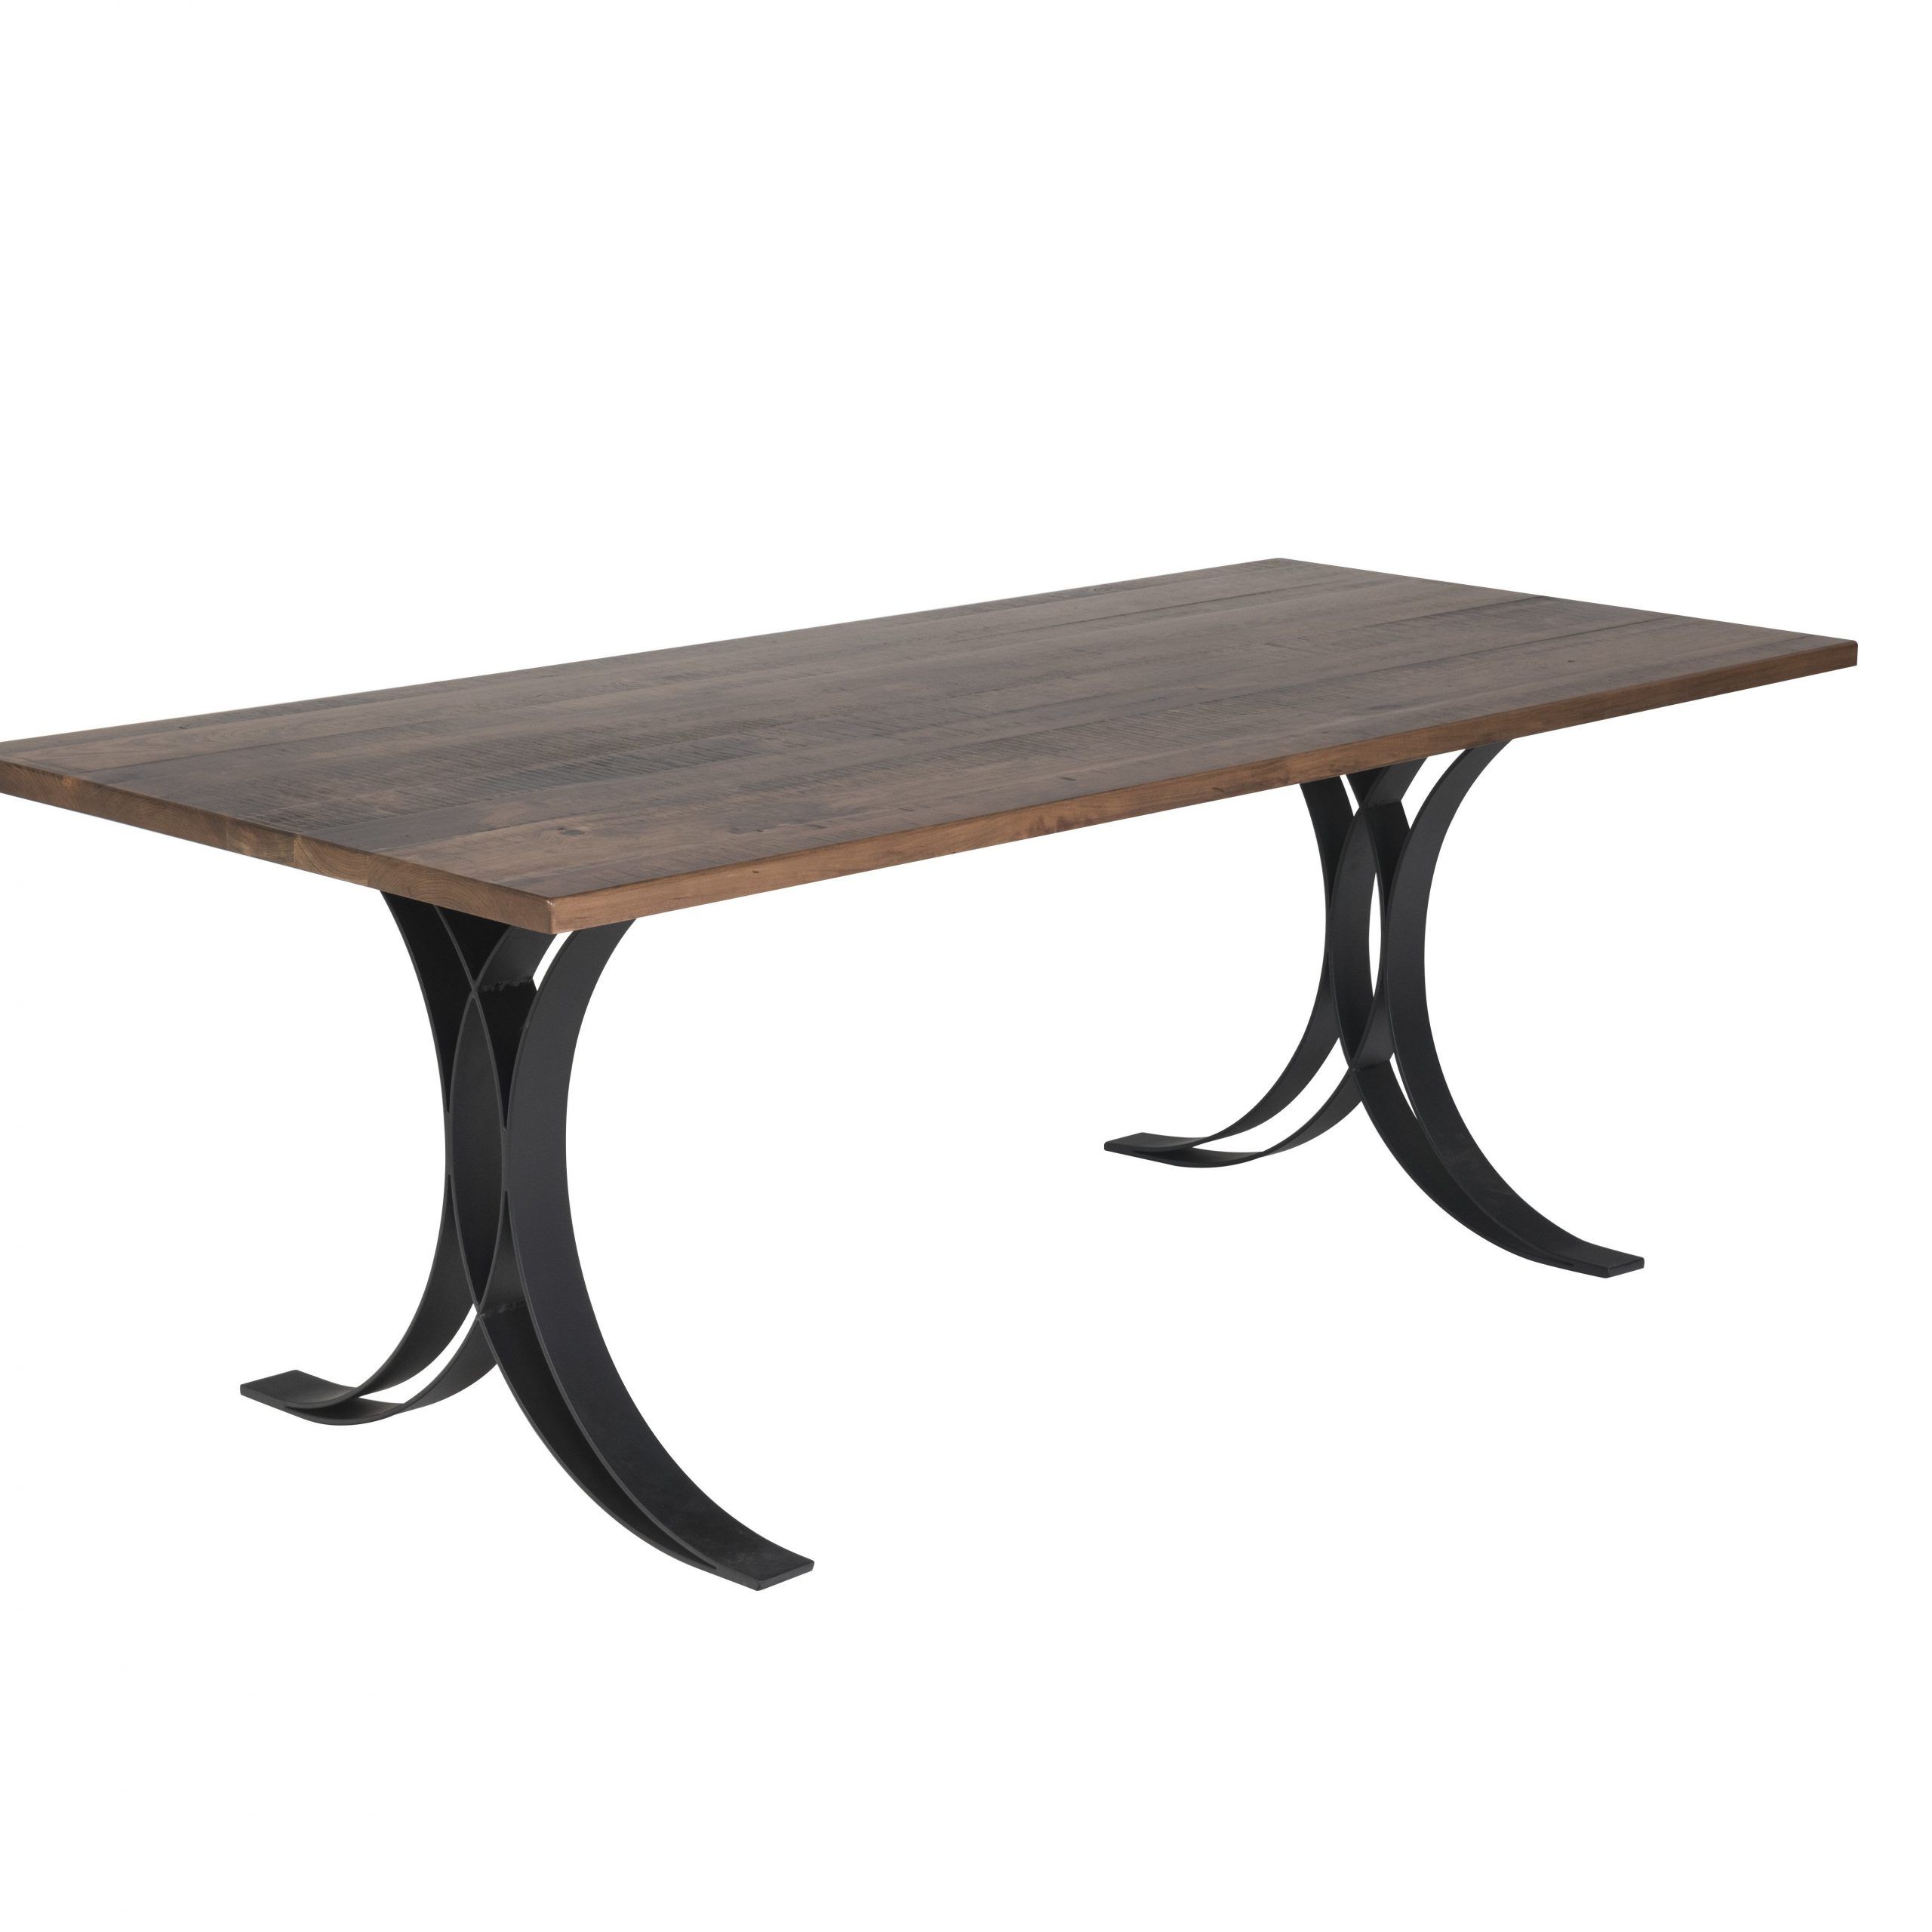 Amish Dawson Dining Table Intended For Recent Dawson Pedestal Dining Tables (View 9 of 25)